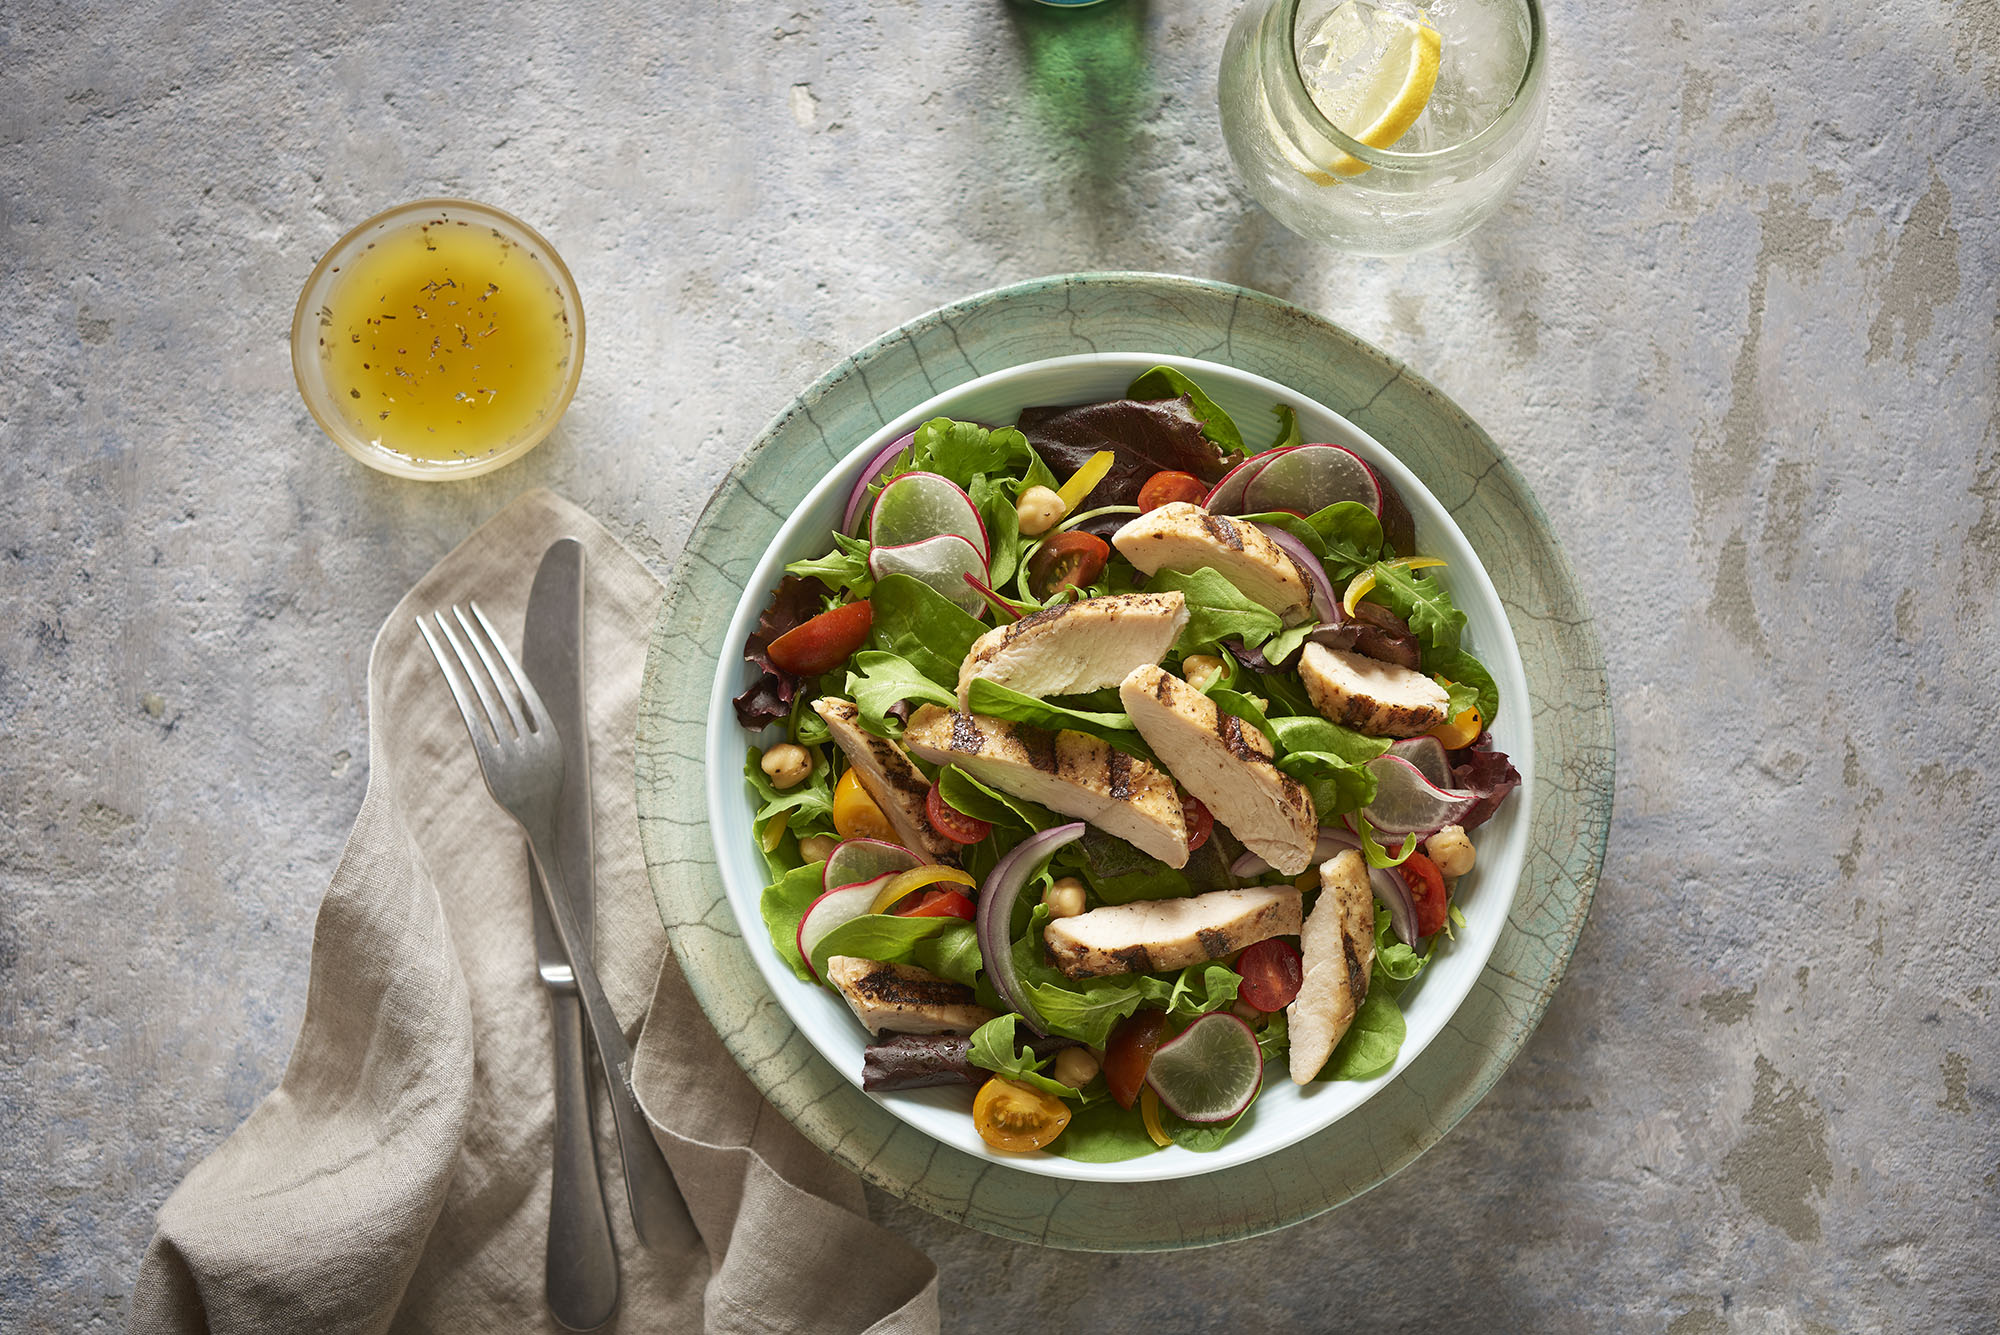 Chicken and Vegetable Salad